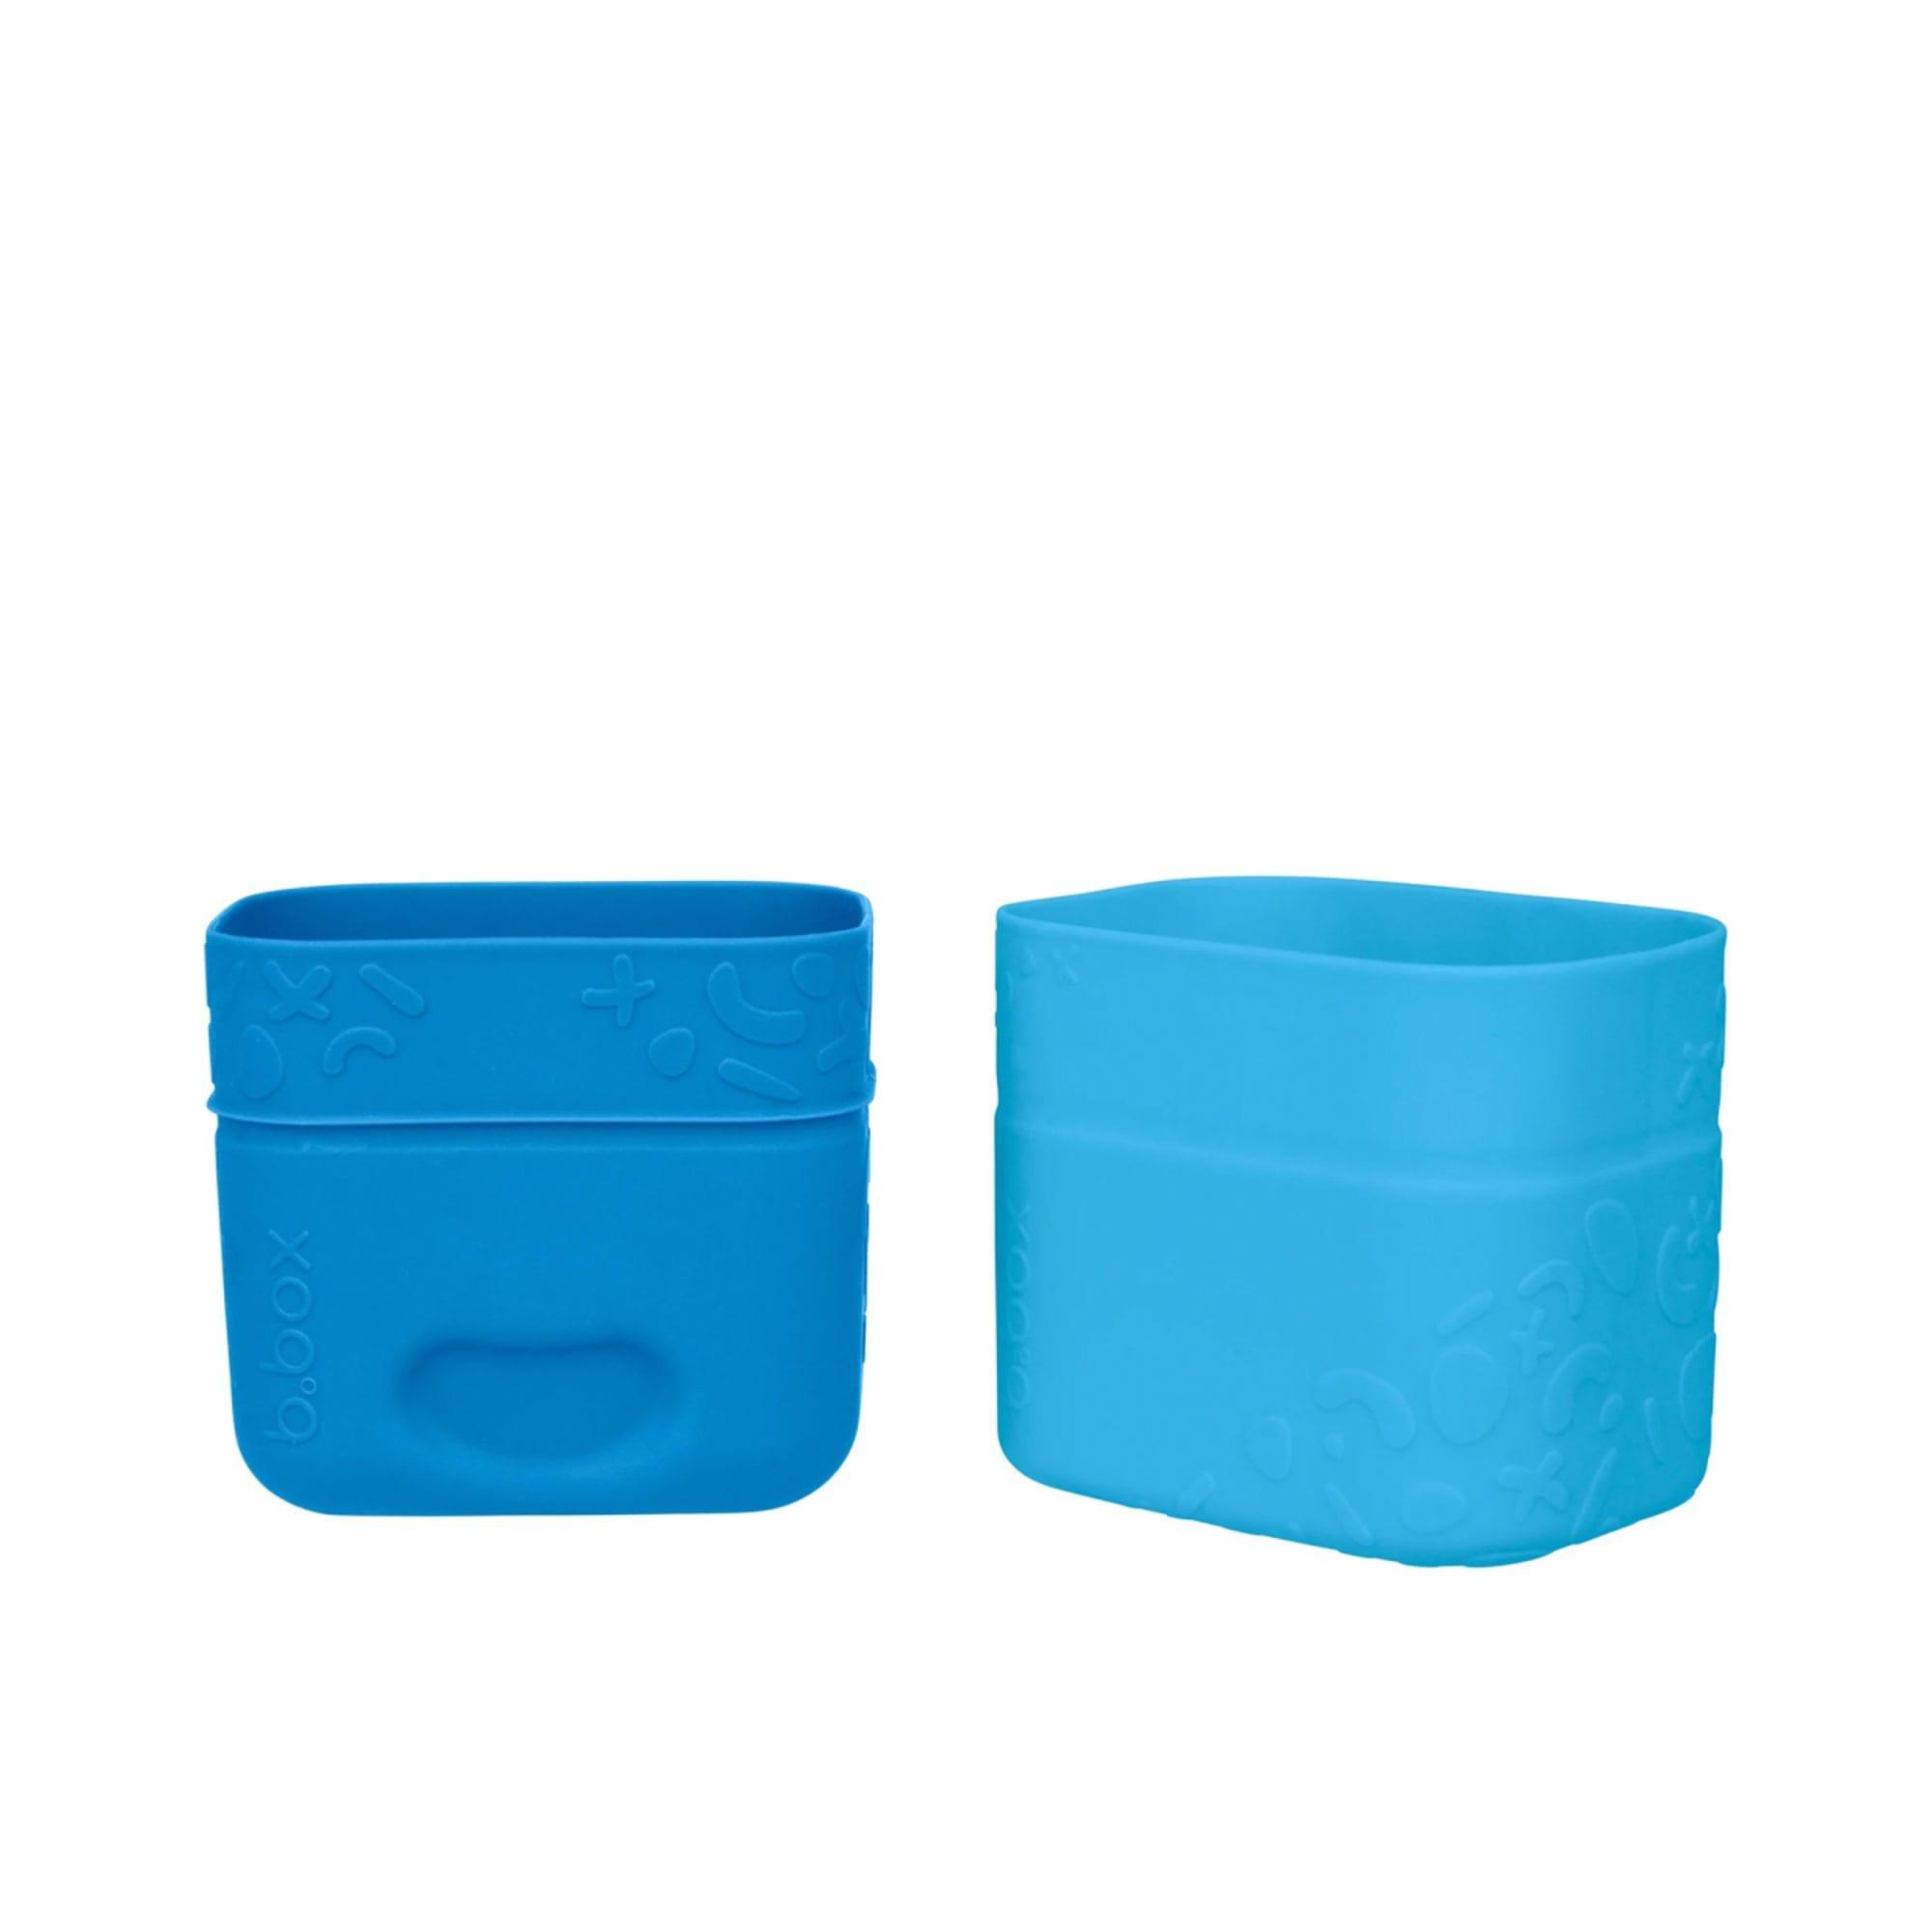 b.box Silicone Snack Cup Set of 2 Ocean Image 1